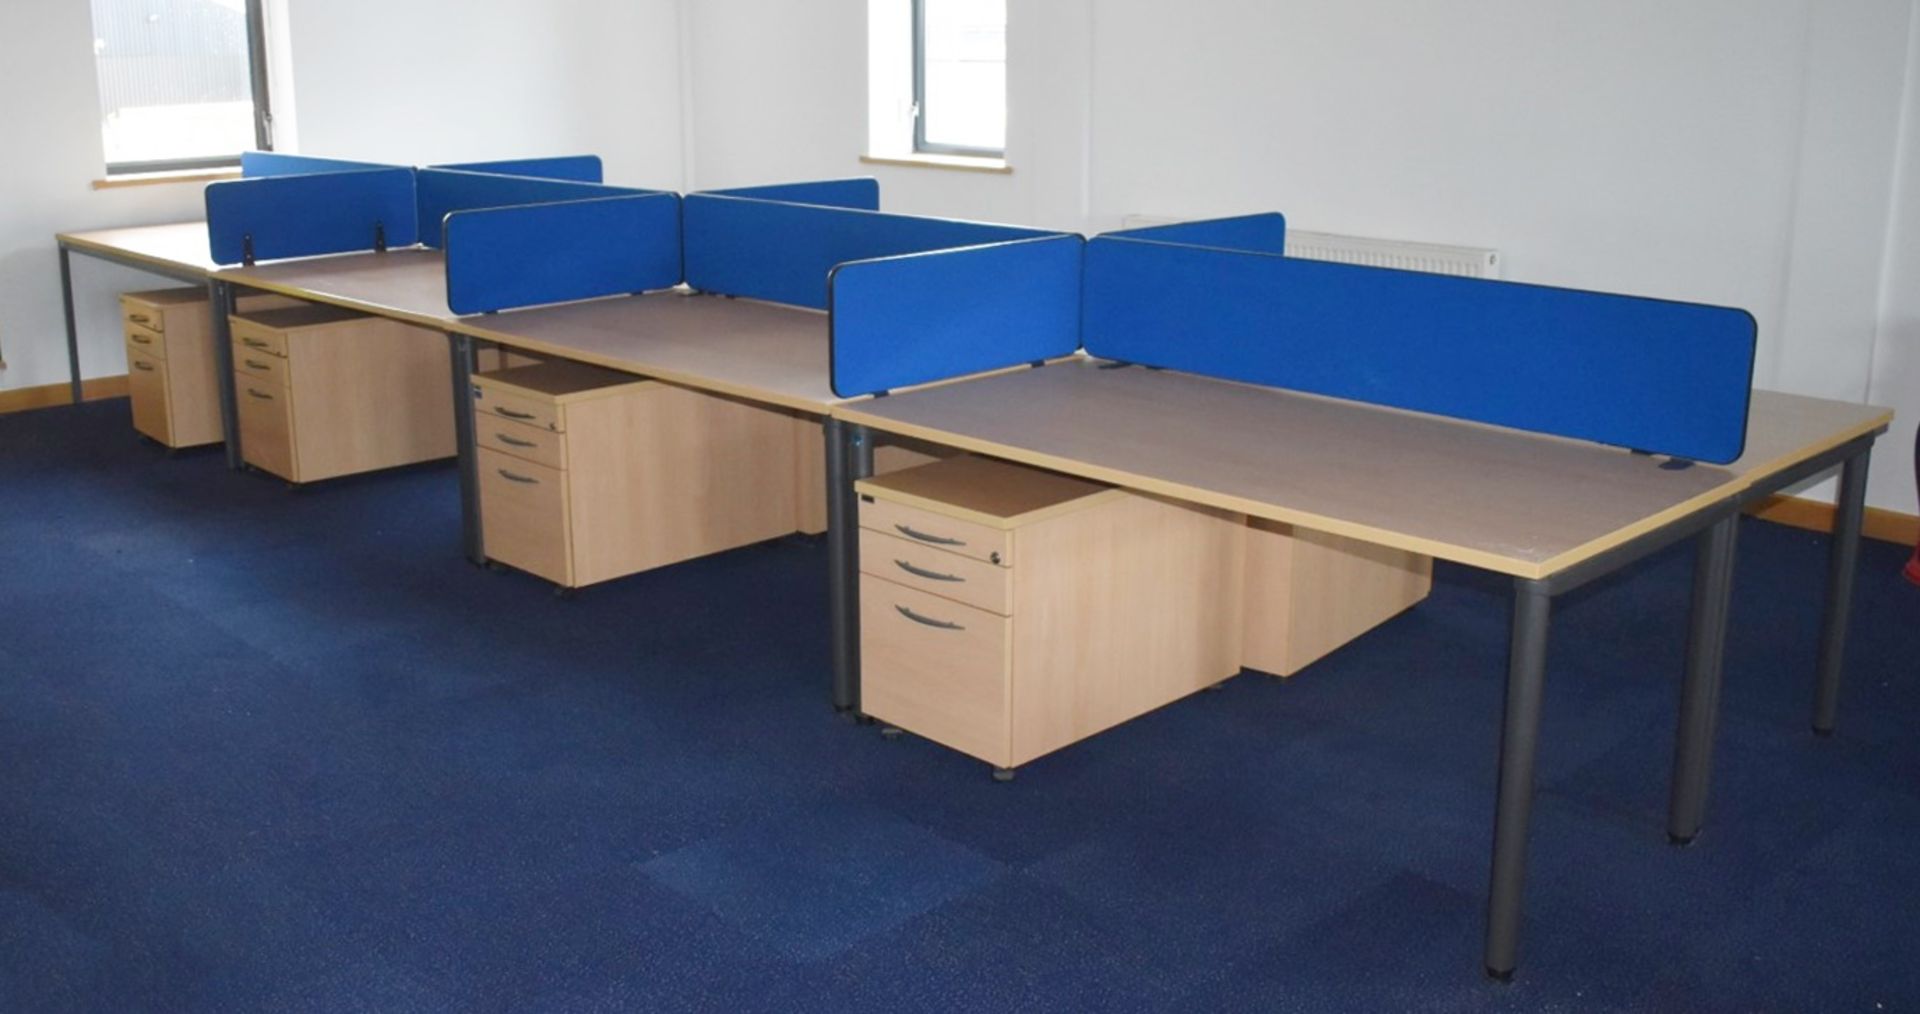 8 x Beech Office Desks With Drawer Pedestals and Privacy Partitions - H72 x W160 x D80 cms - Ref - Image 6 of 11